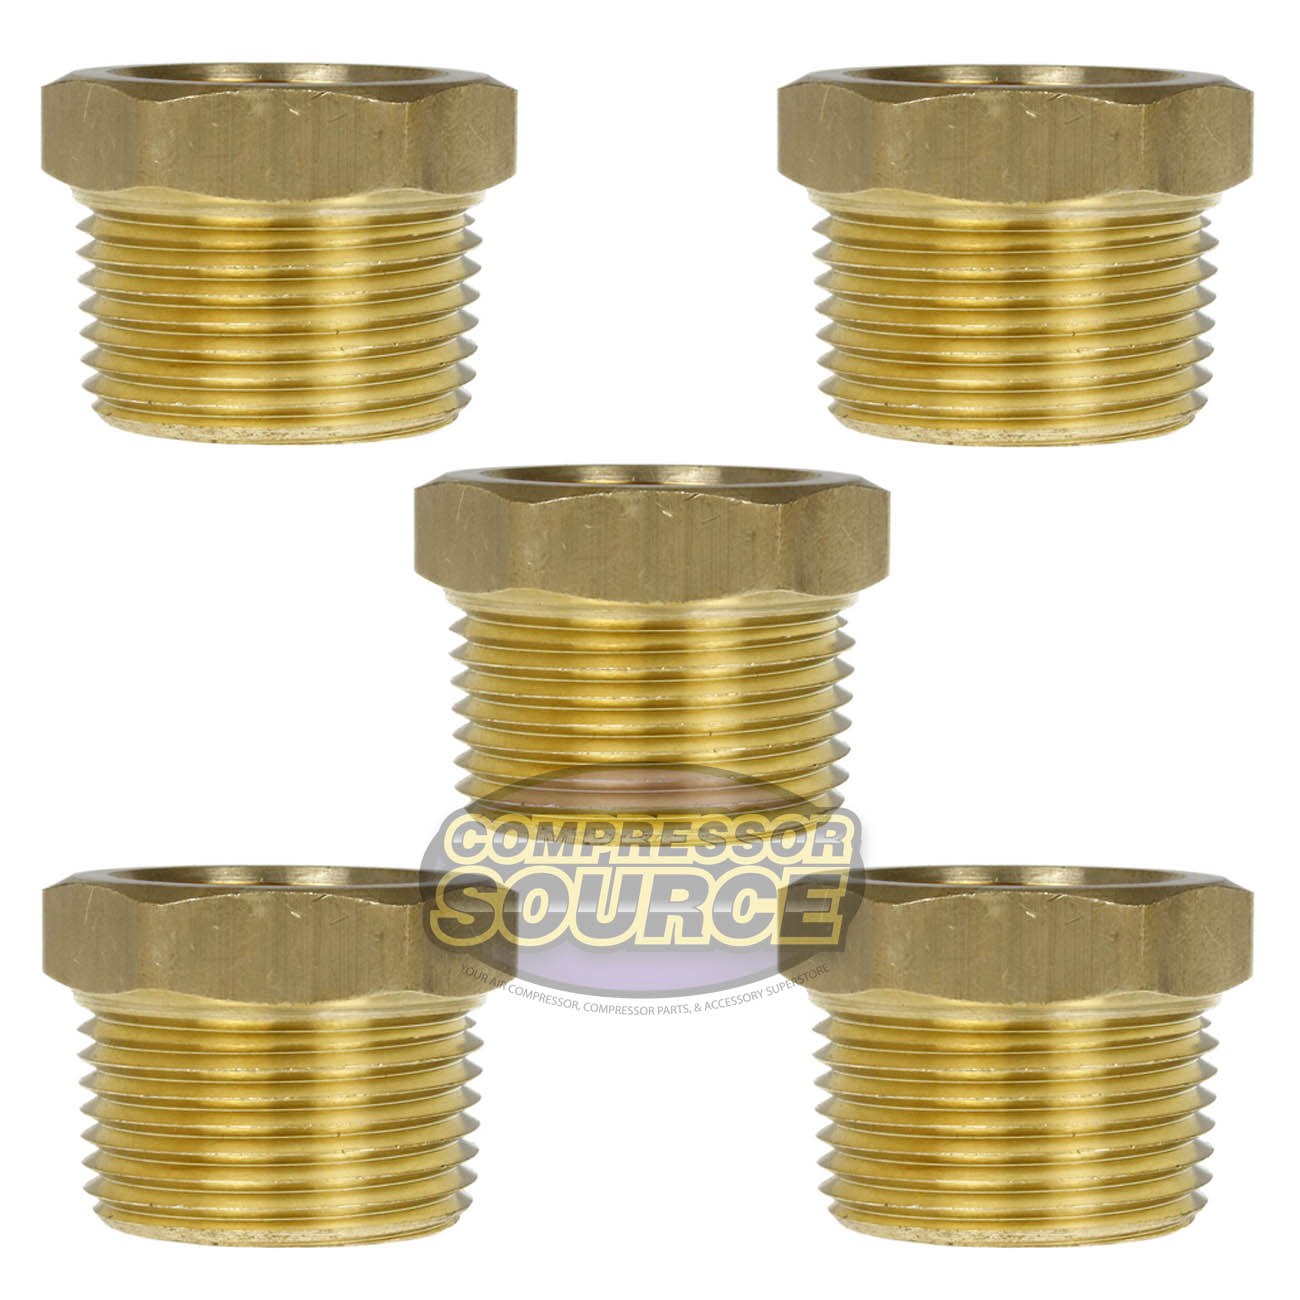 5 Pack 1" x 3/4" Male NPTF x Female NPTF Hex Bushing Reducer Solid Brass Fitting